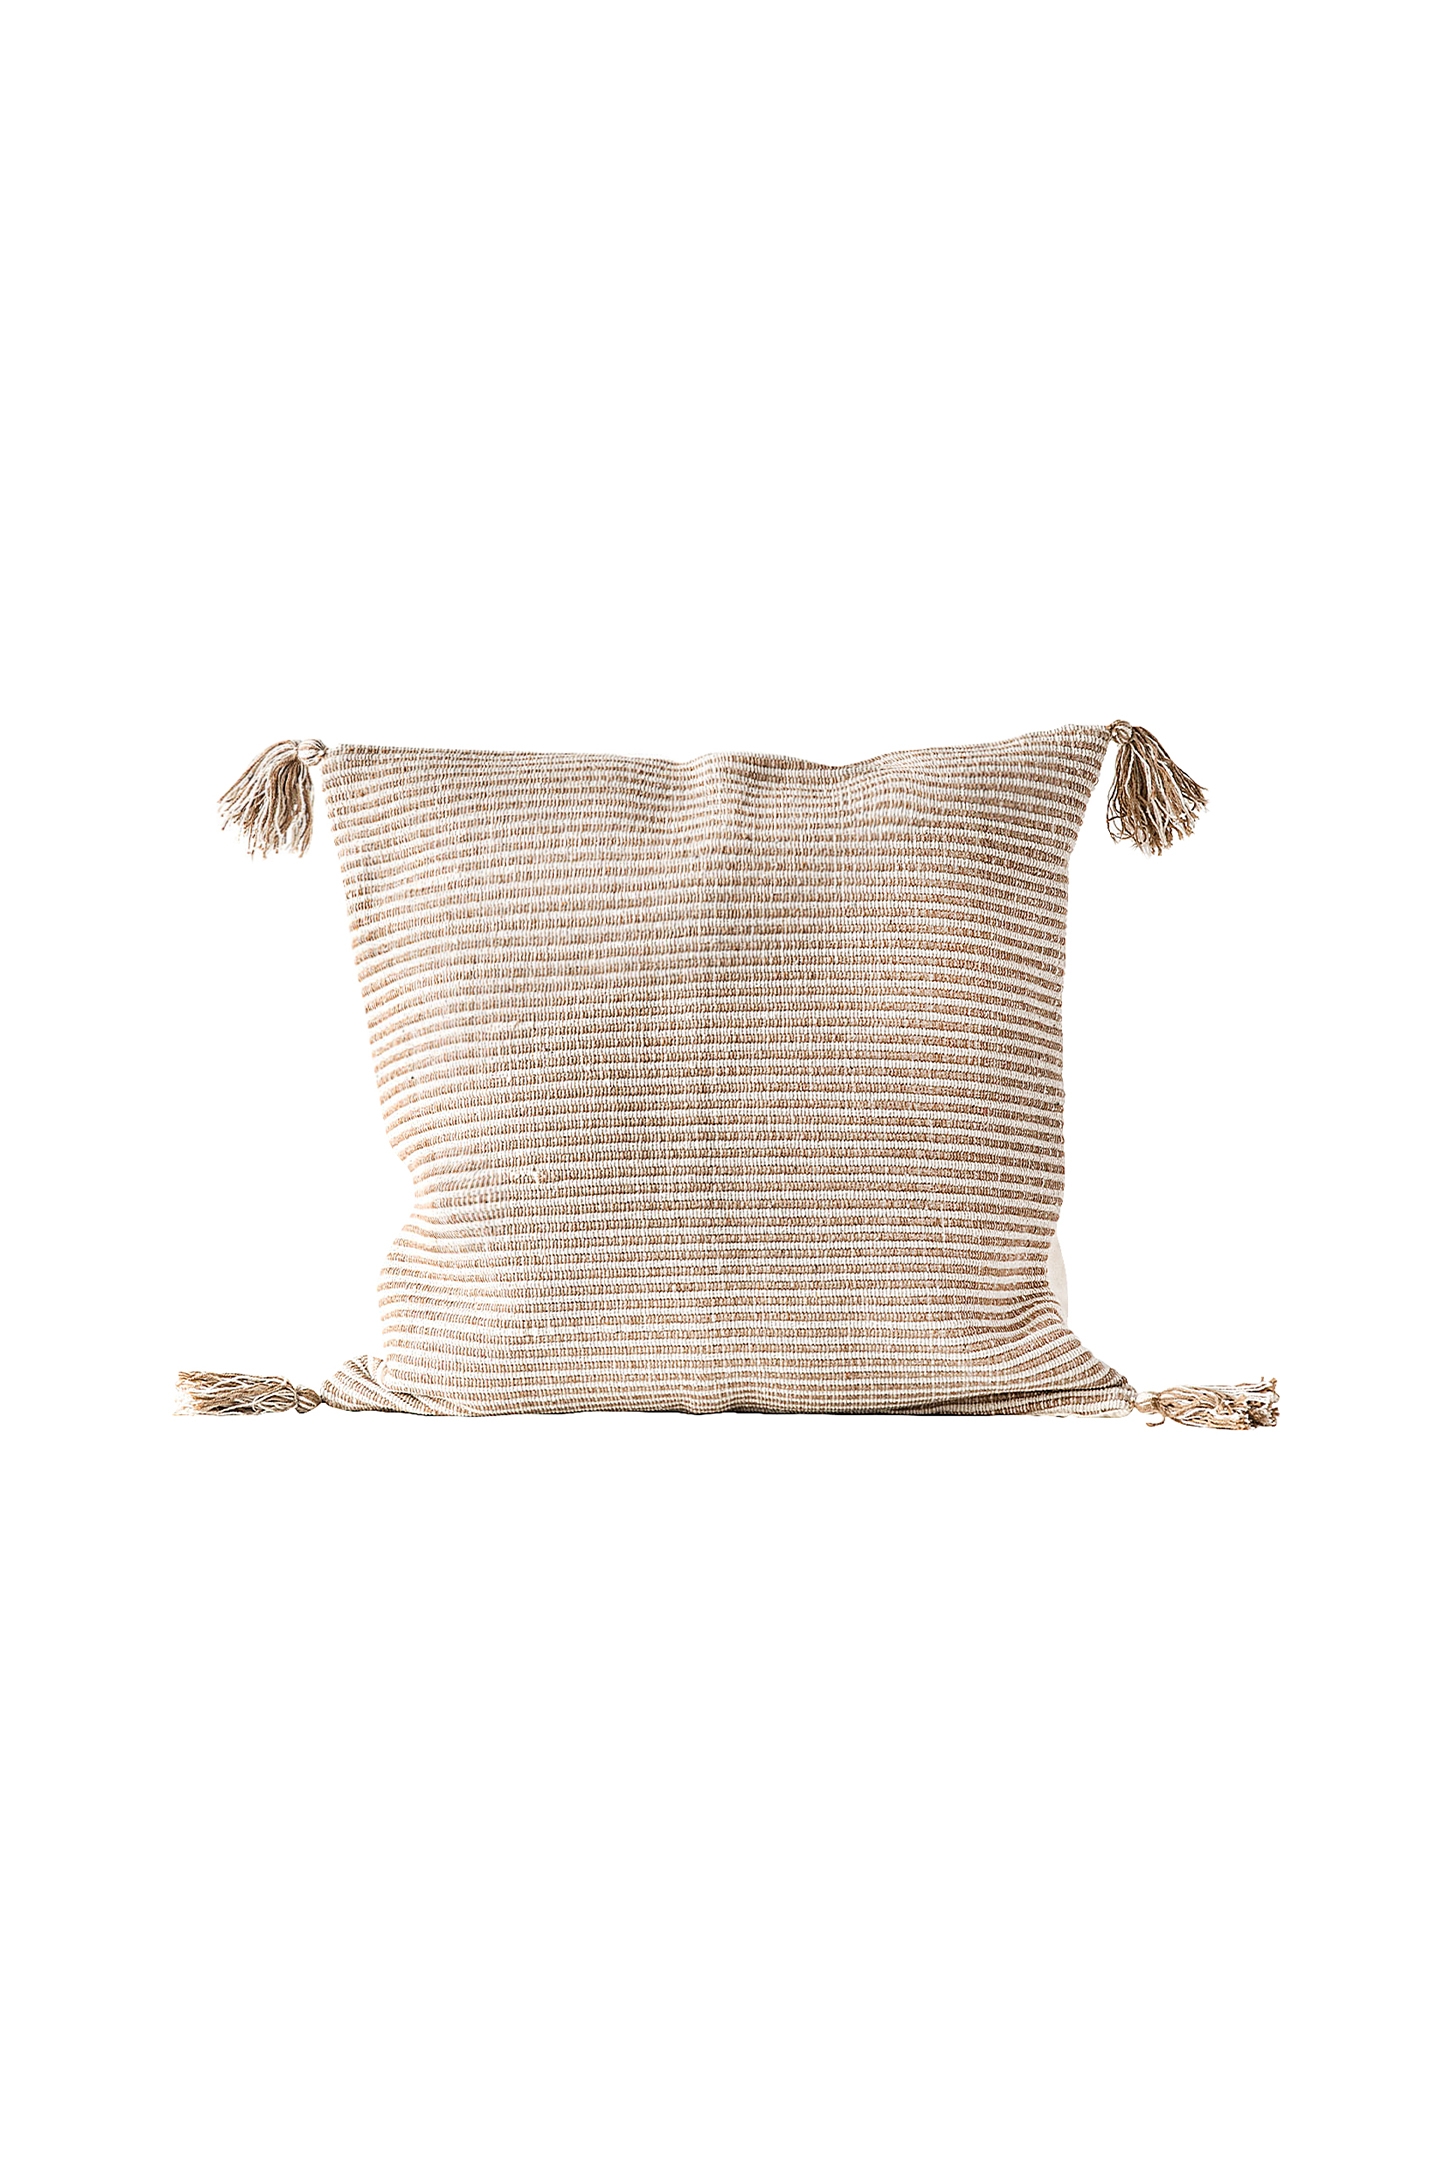 Stafford Striped Pillows, Neutrals, 24" x 24", Set of 2 - Image 2